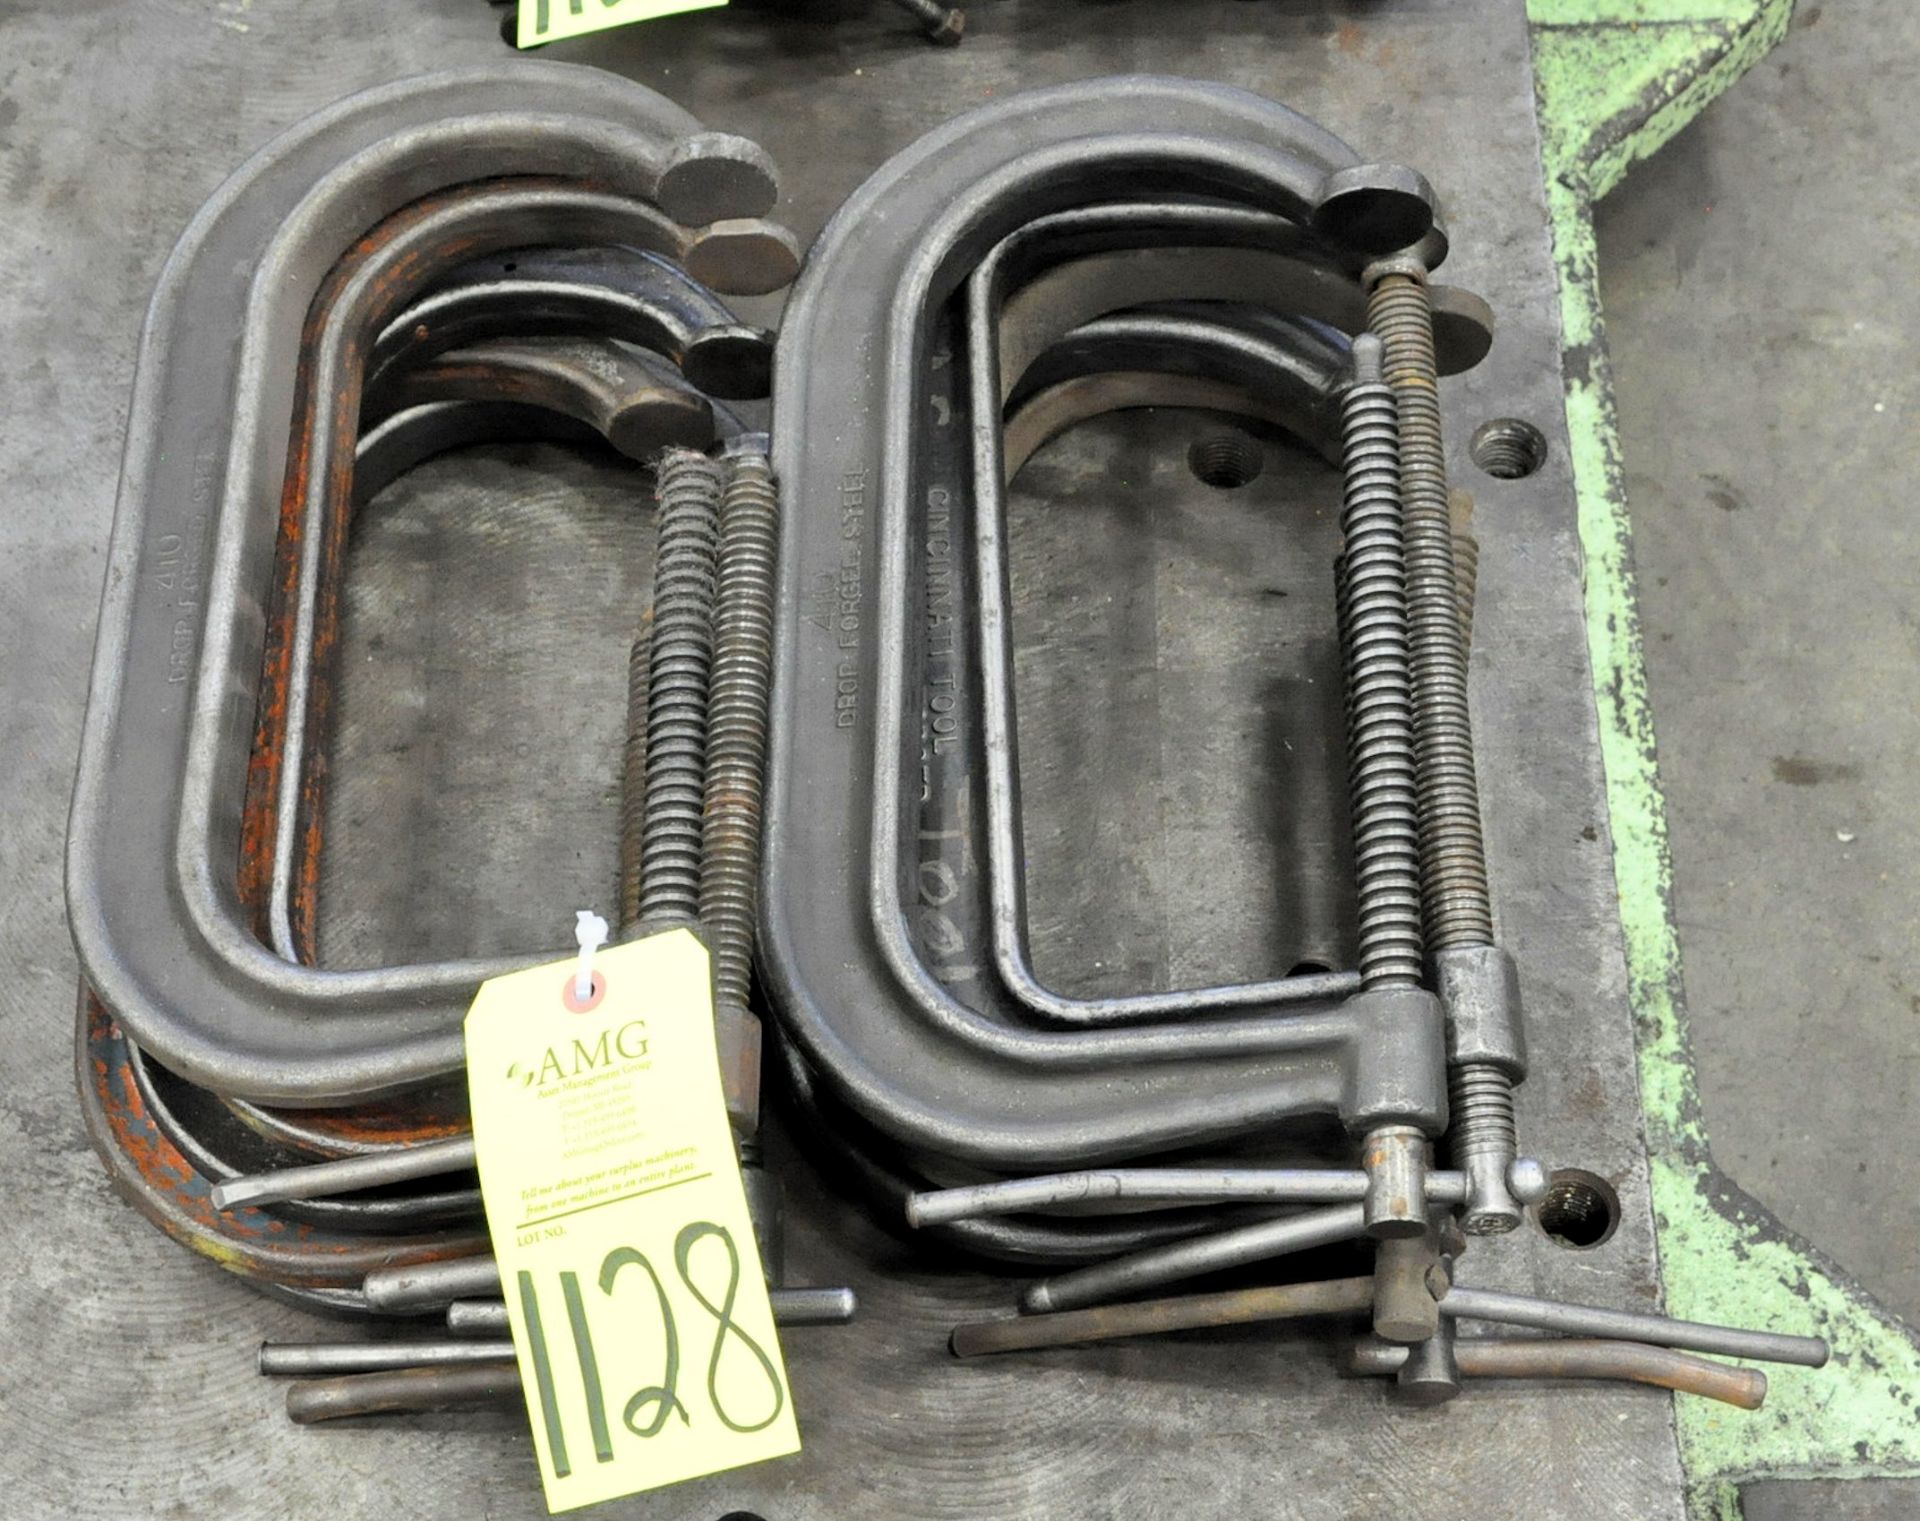 Lot-10" C-Clamps in (2) Stacks, (G-15), (Yellow Tag)